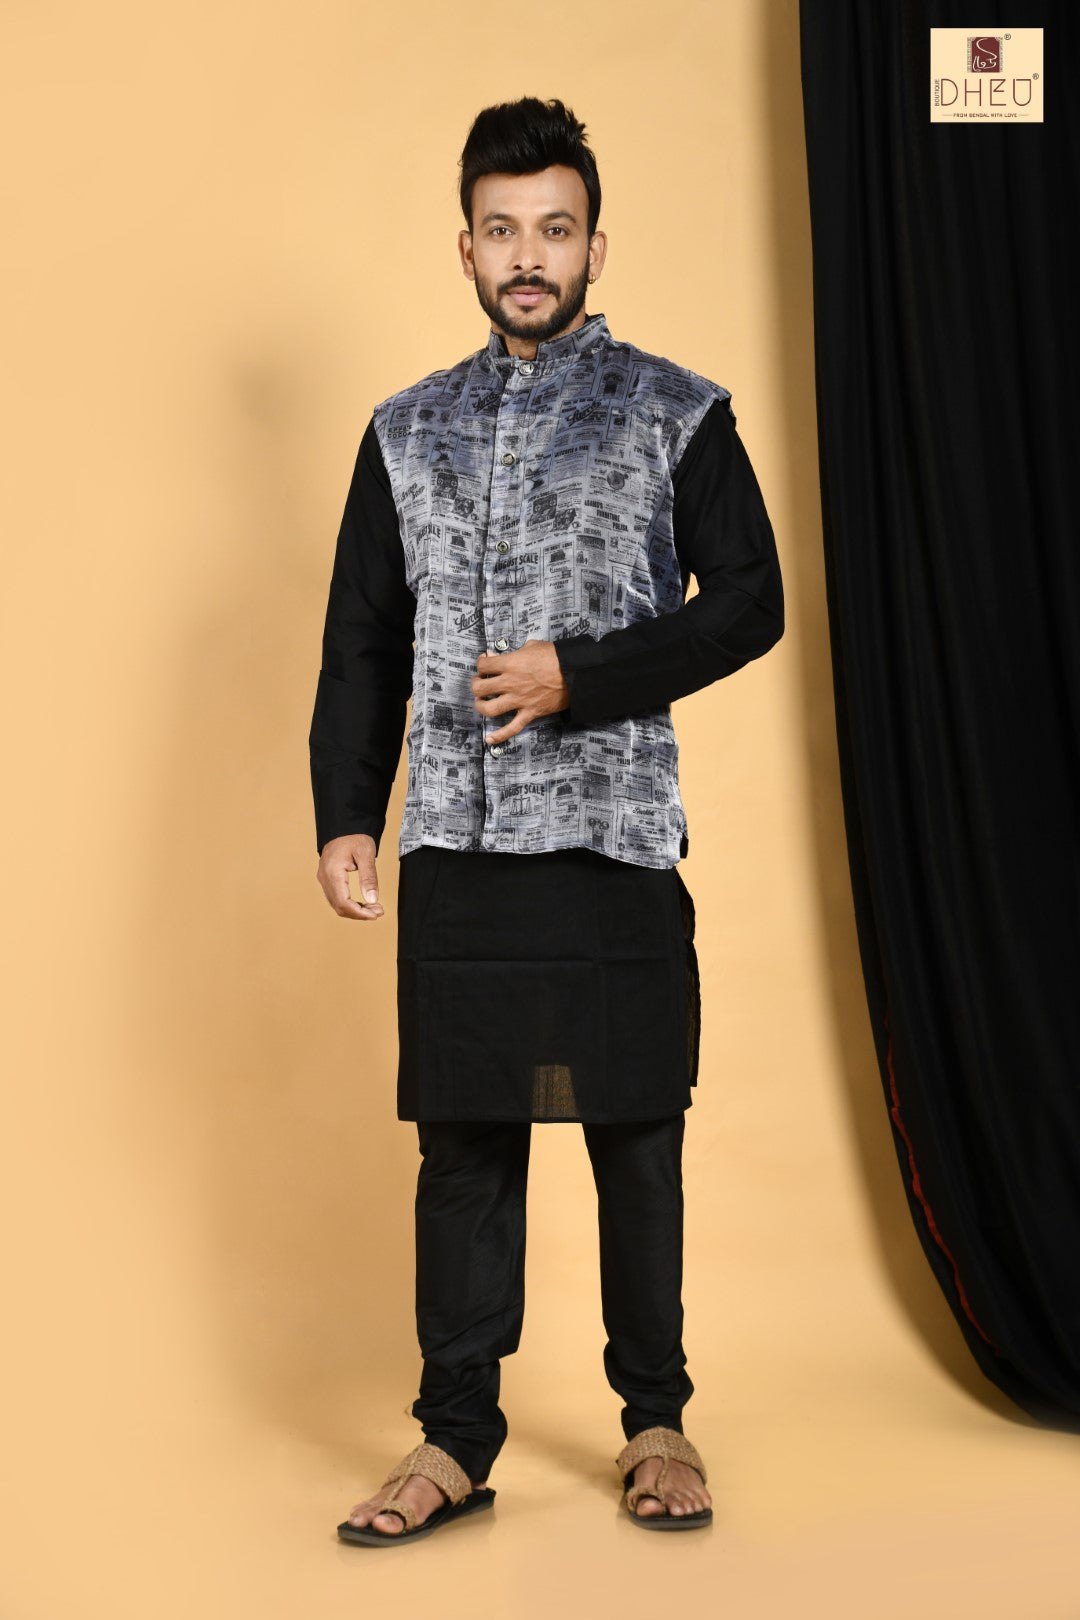 The designer , sophisticate newspaper print jacket with black kurta at low cost only in dheu.in